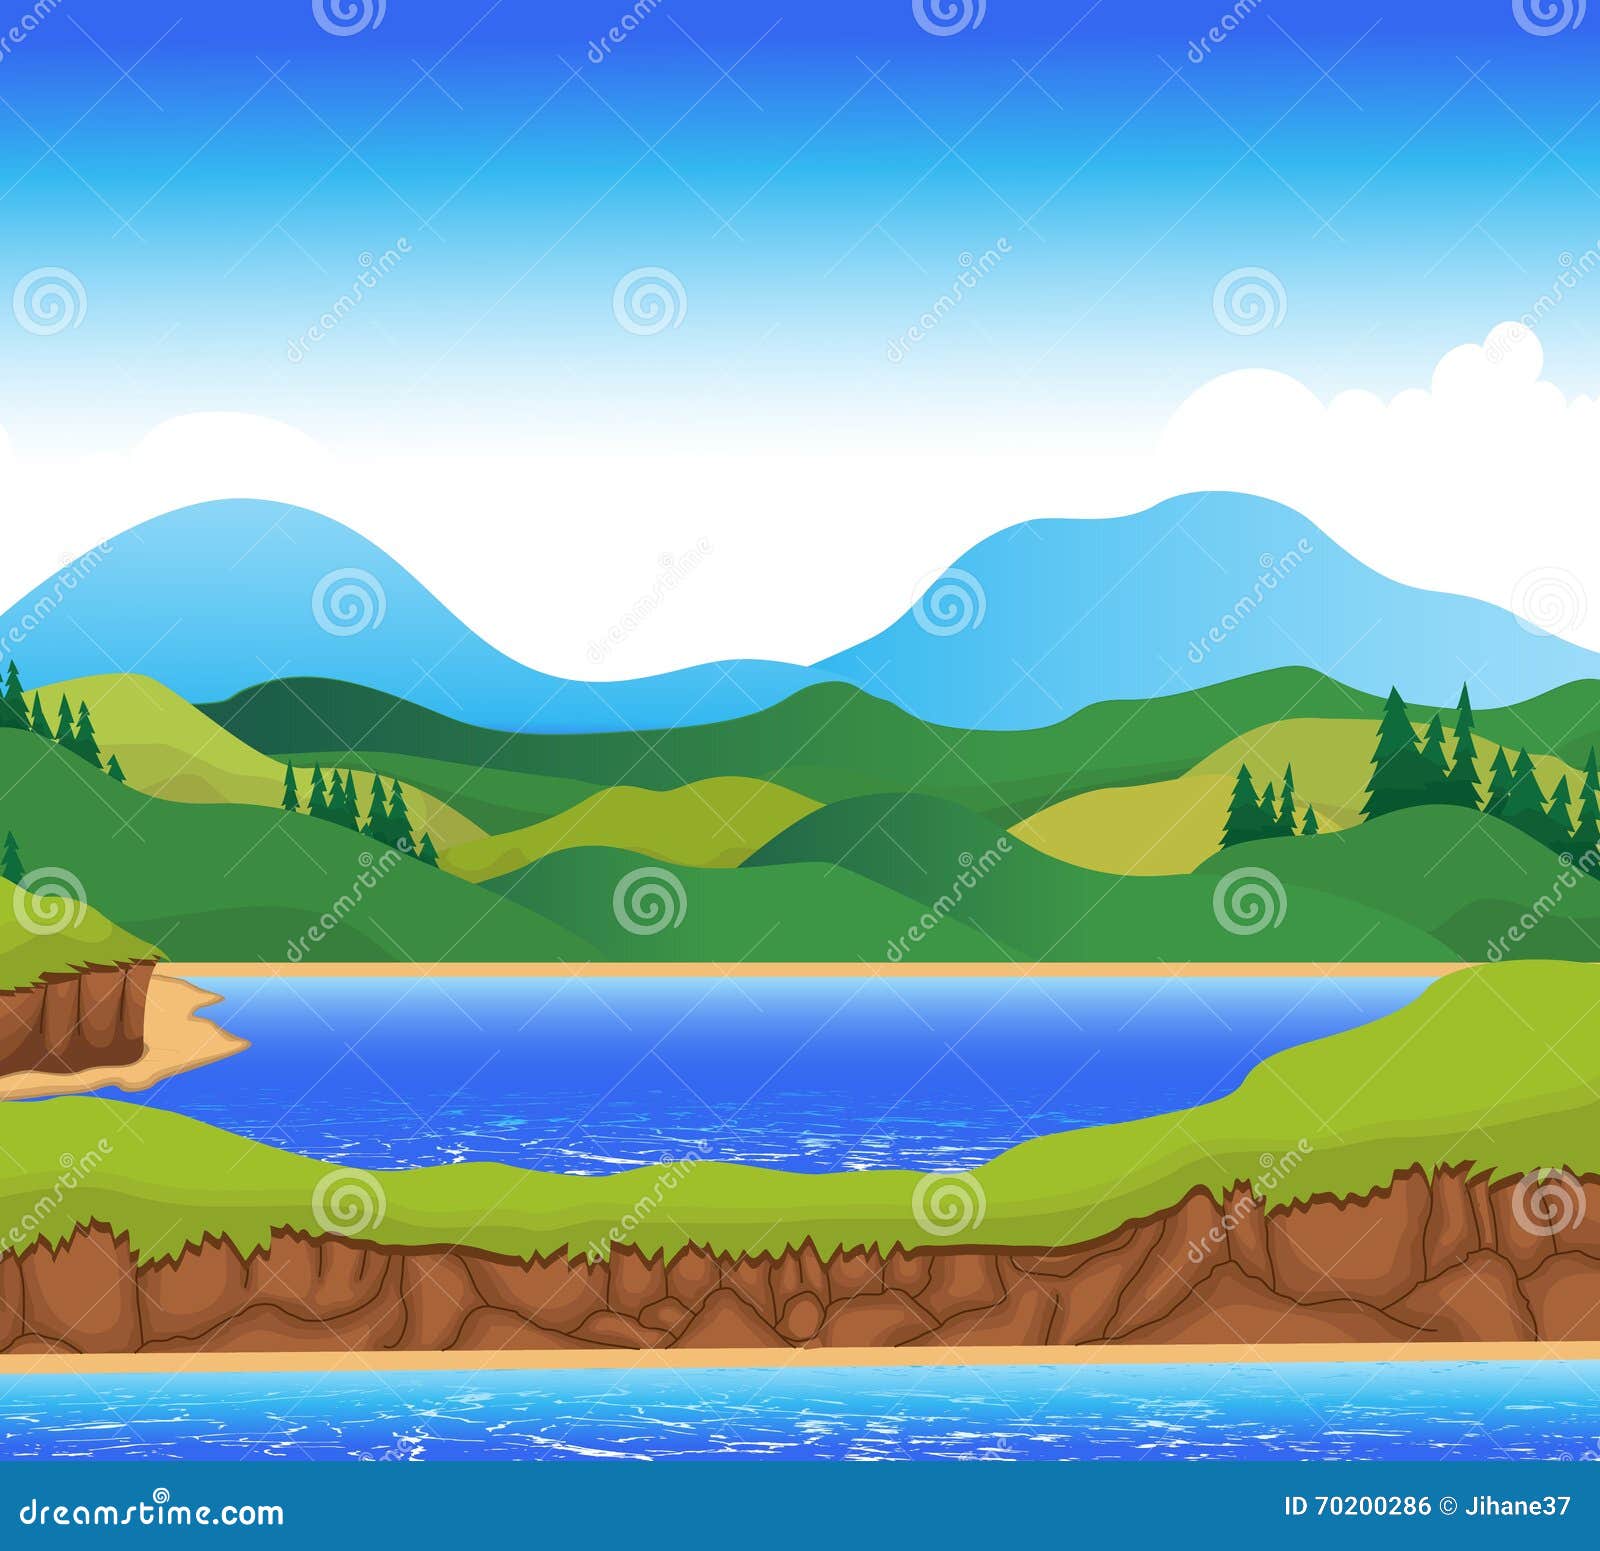 Beautiful View of River Cartoon with Mountain Landscape Background ...